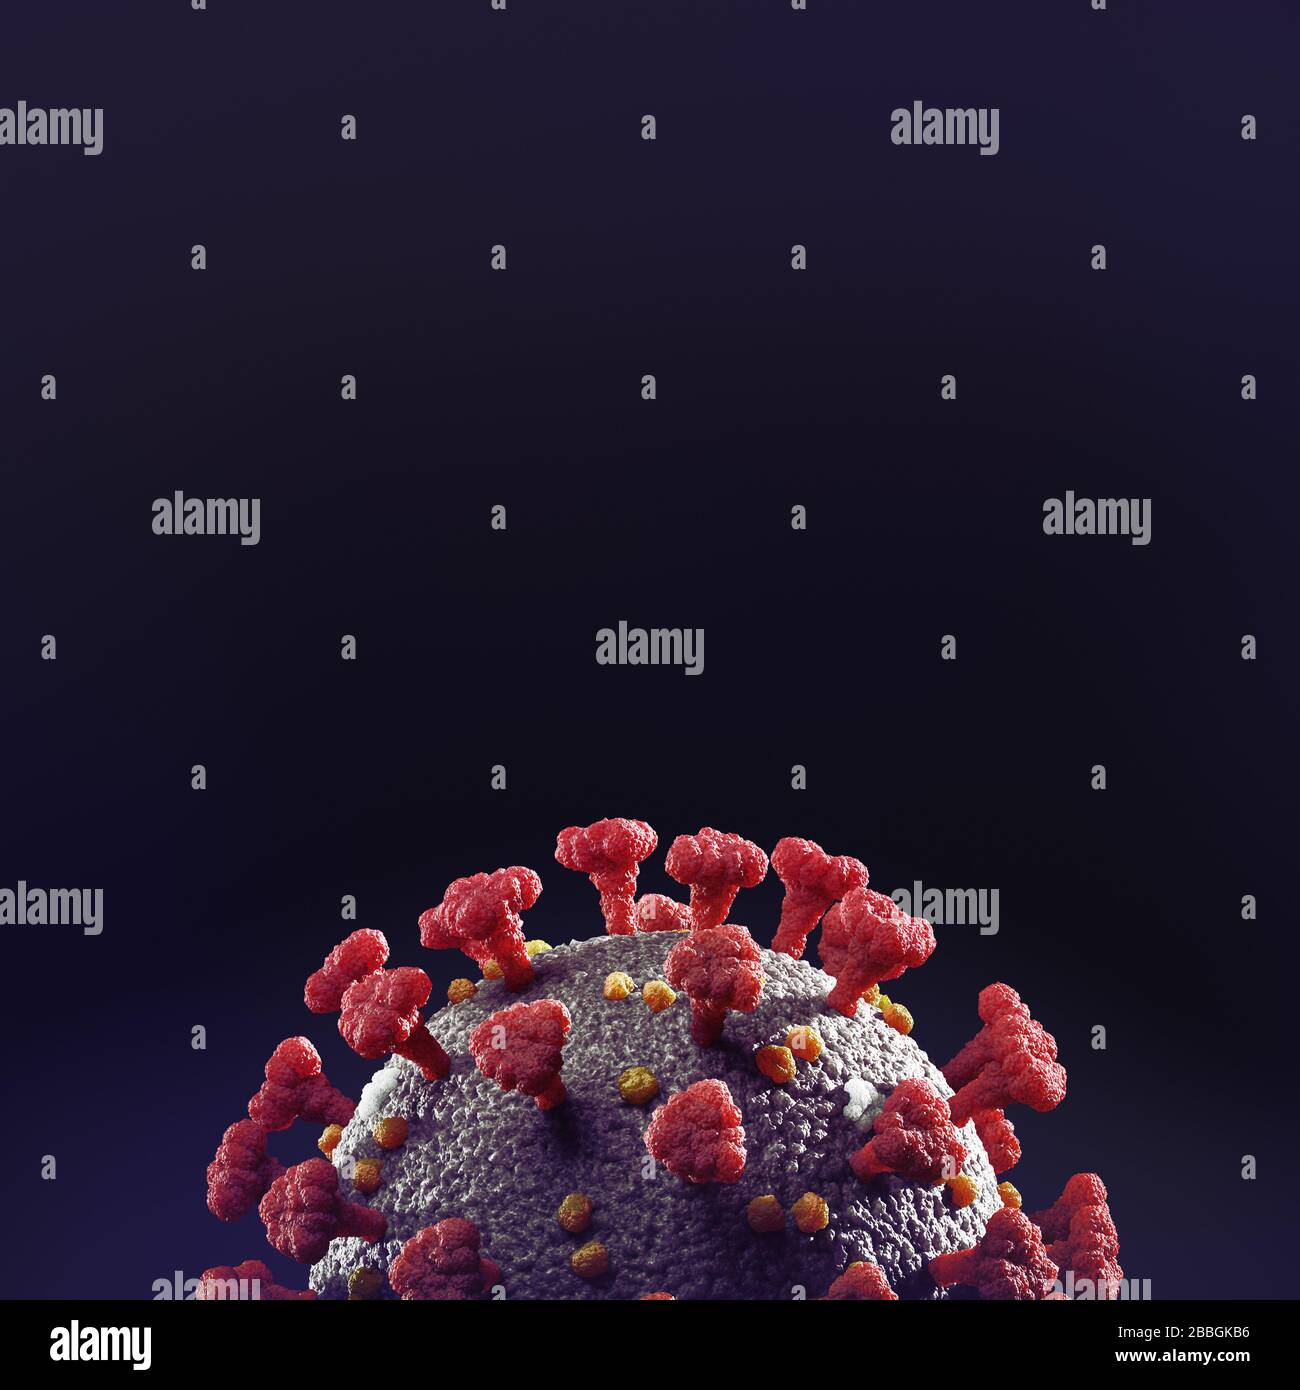 Coronavirus, COVID-19, SARS-CoV-2 Corona virus particle closeup. Scientific medical 3D illustration in red color isolated on black background with cop Stock Photo